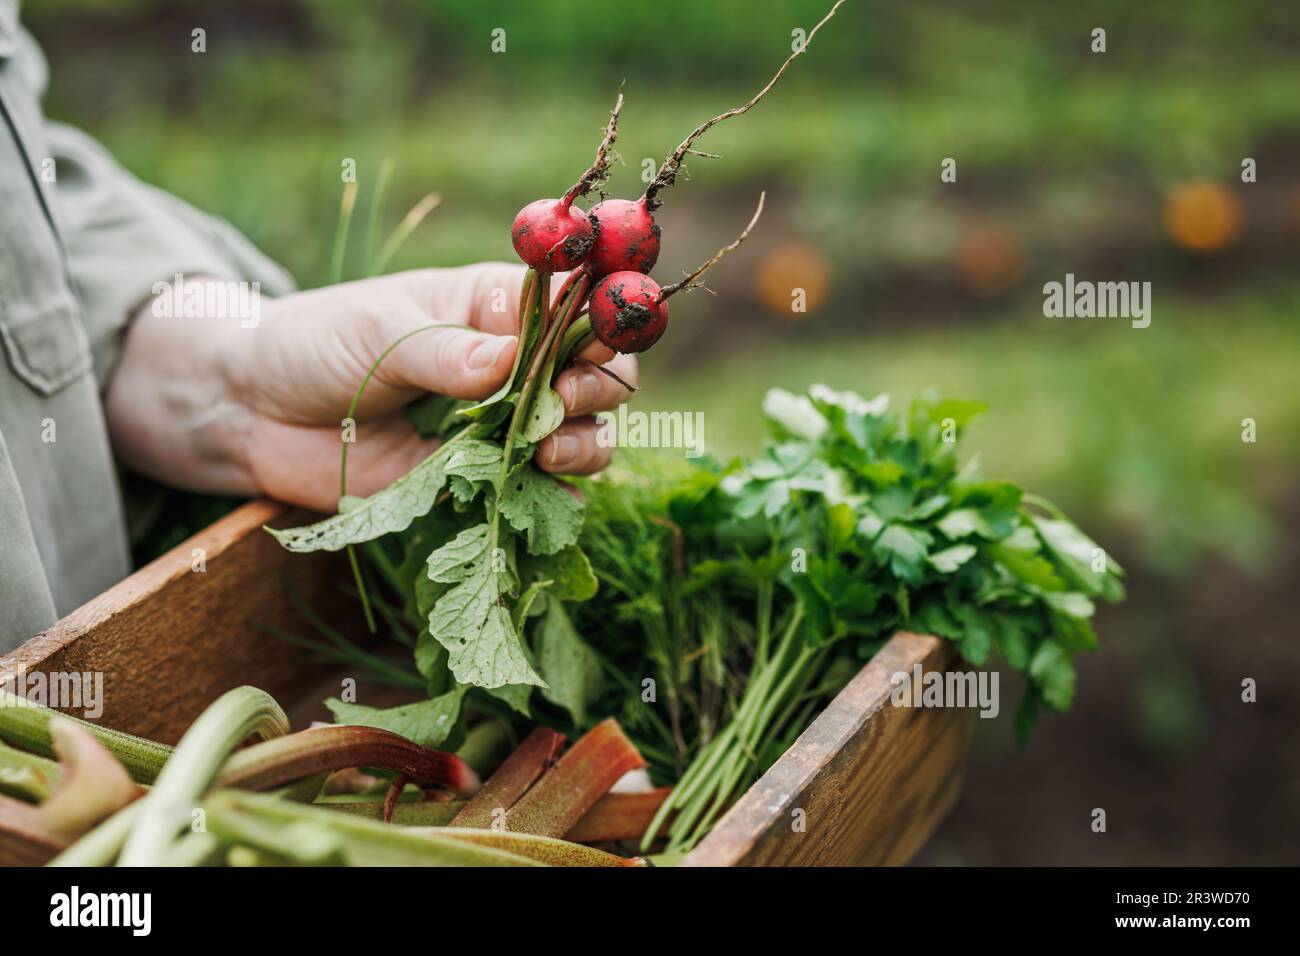 Farmer freshly picked radish from vegetable garden. Woman holding wooden crate with harvested organic food Stock Photo